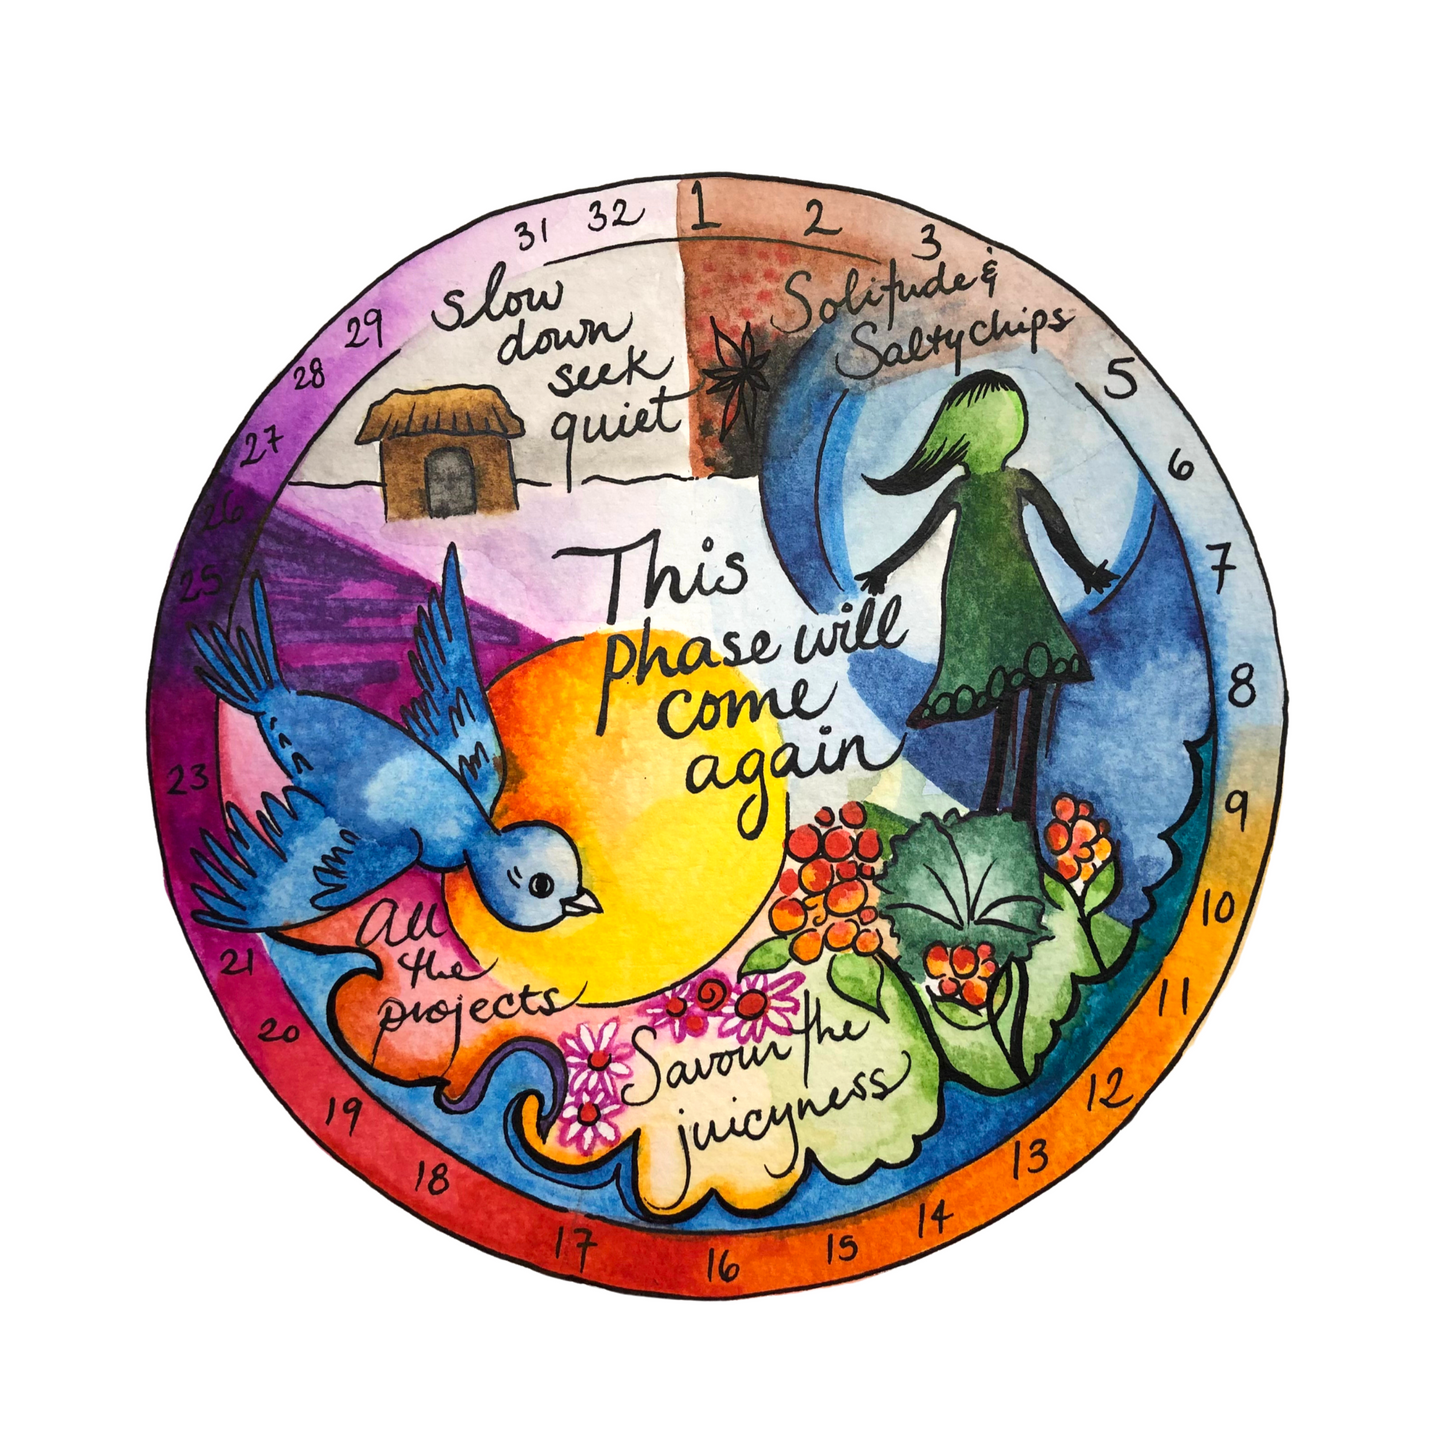 Your Wise Cycle: A Custom Illustration